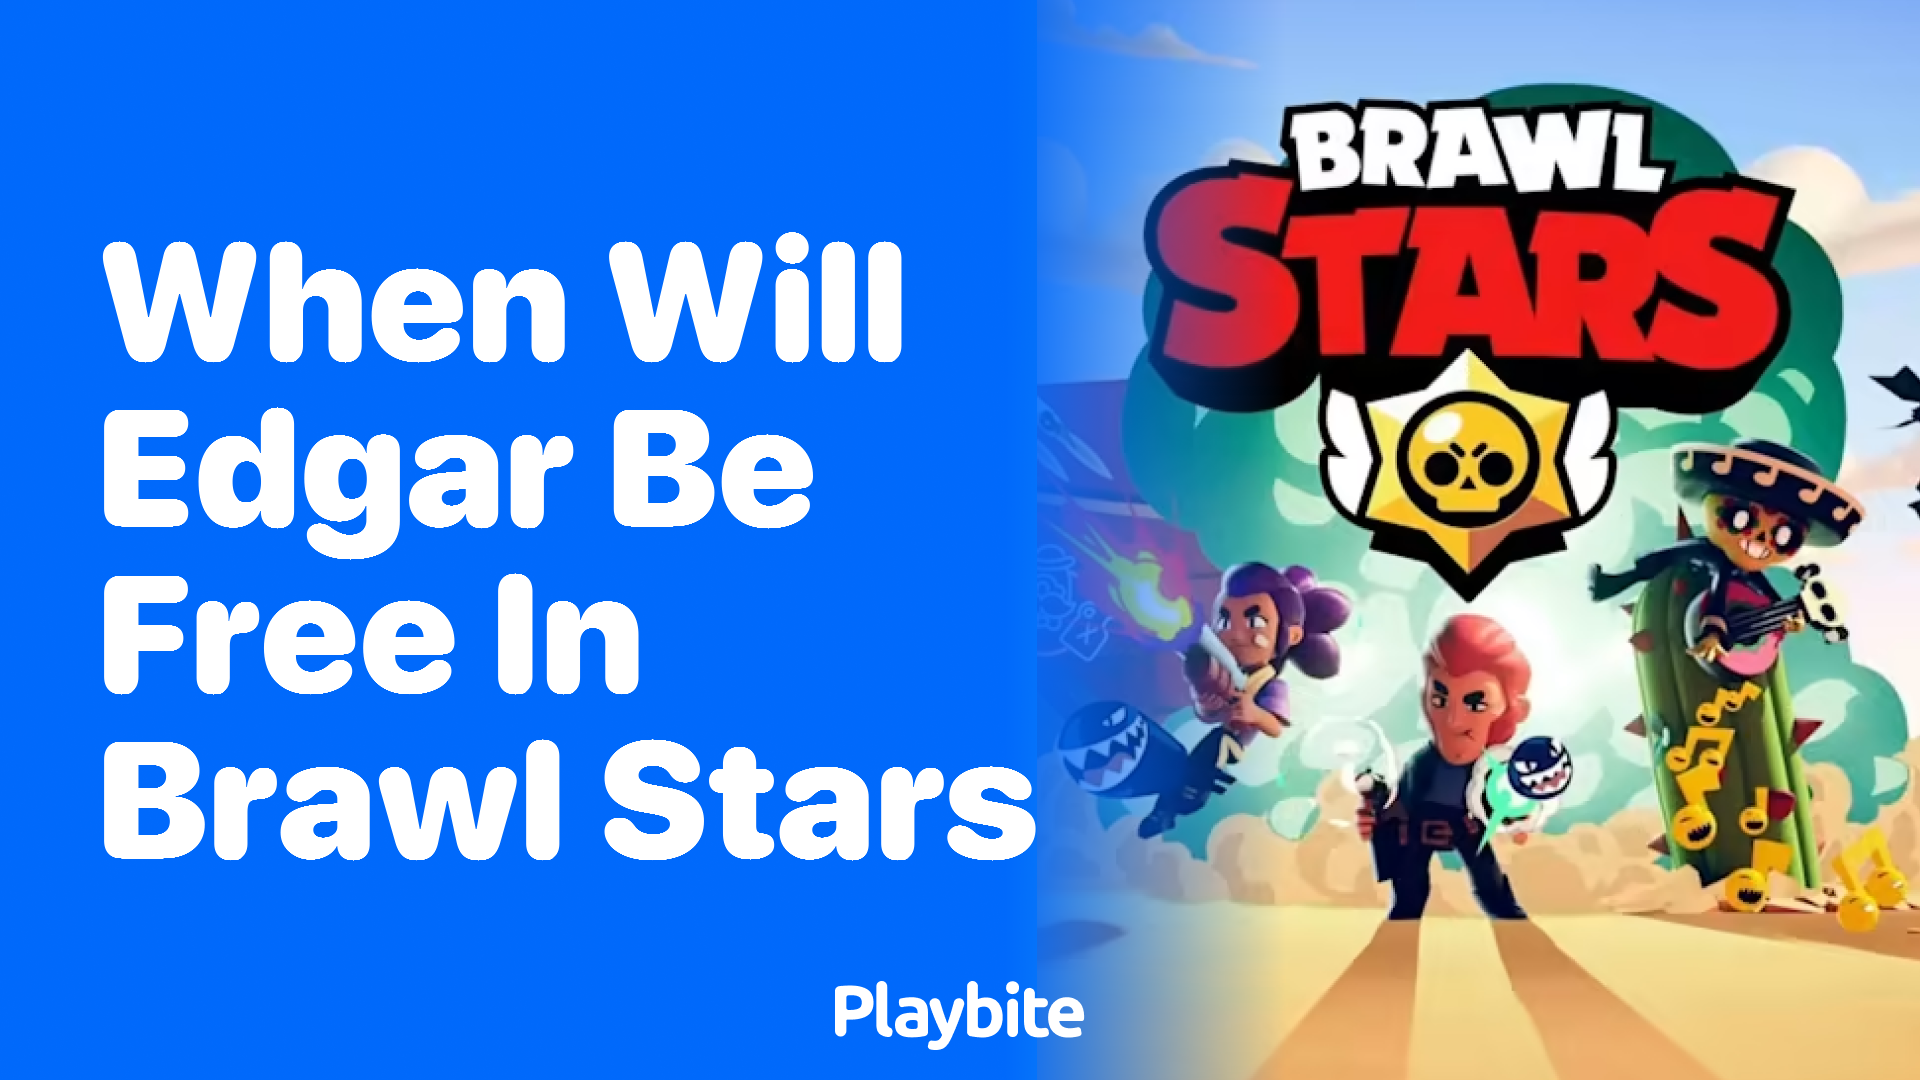 When Can I Get Edgar in Brawl Stars? Here's What You Need to Know - Playbite